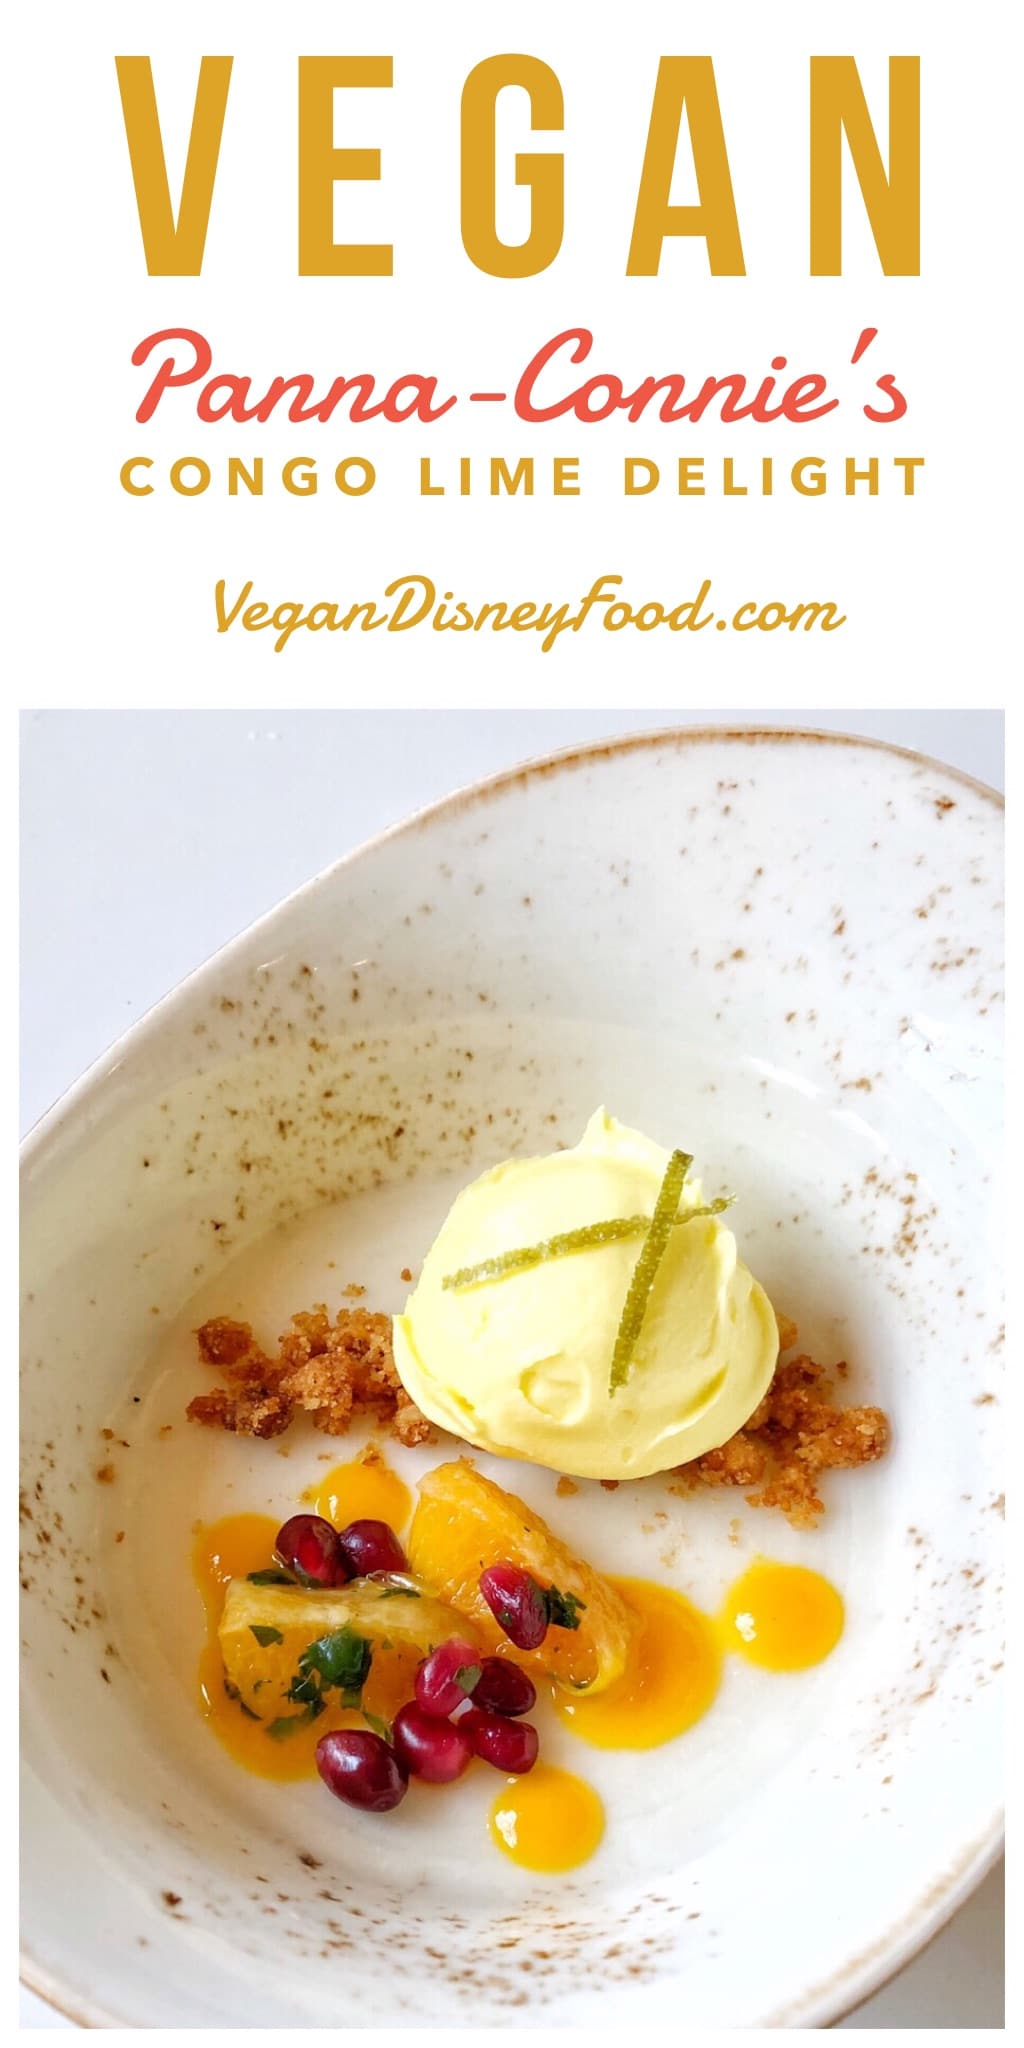 Vegan Panna Connie's Congo Lime Delight at Skipper Canteen in the Magic Kingdom at Walt Disney World